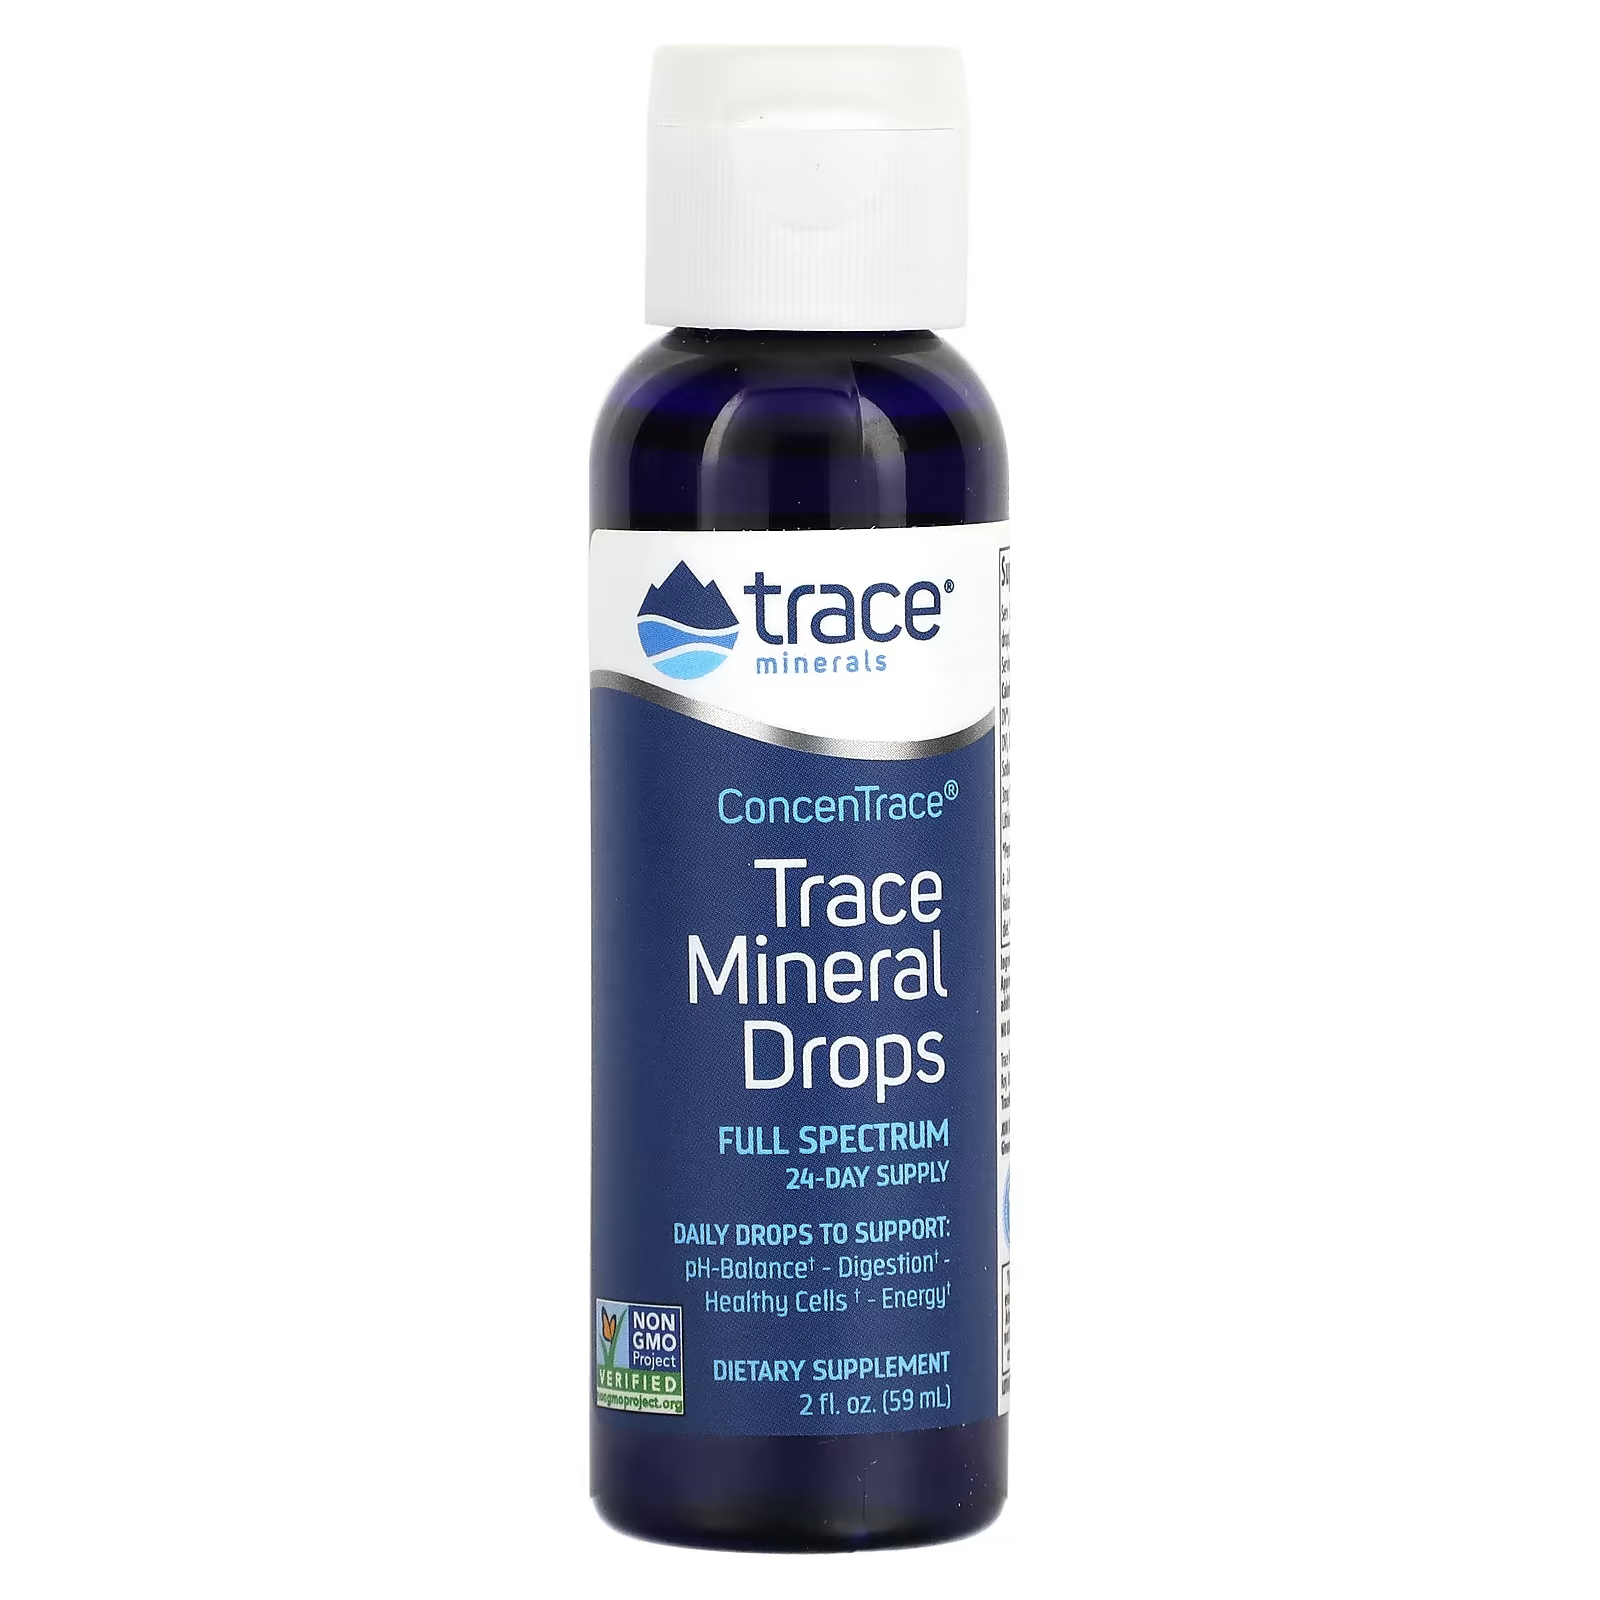 Капли Trace Minerals Concentrace с микроэлементами, 59 мл trace minerals concentrace таблетки с минералами и микроэлементами 300 таблеток